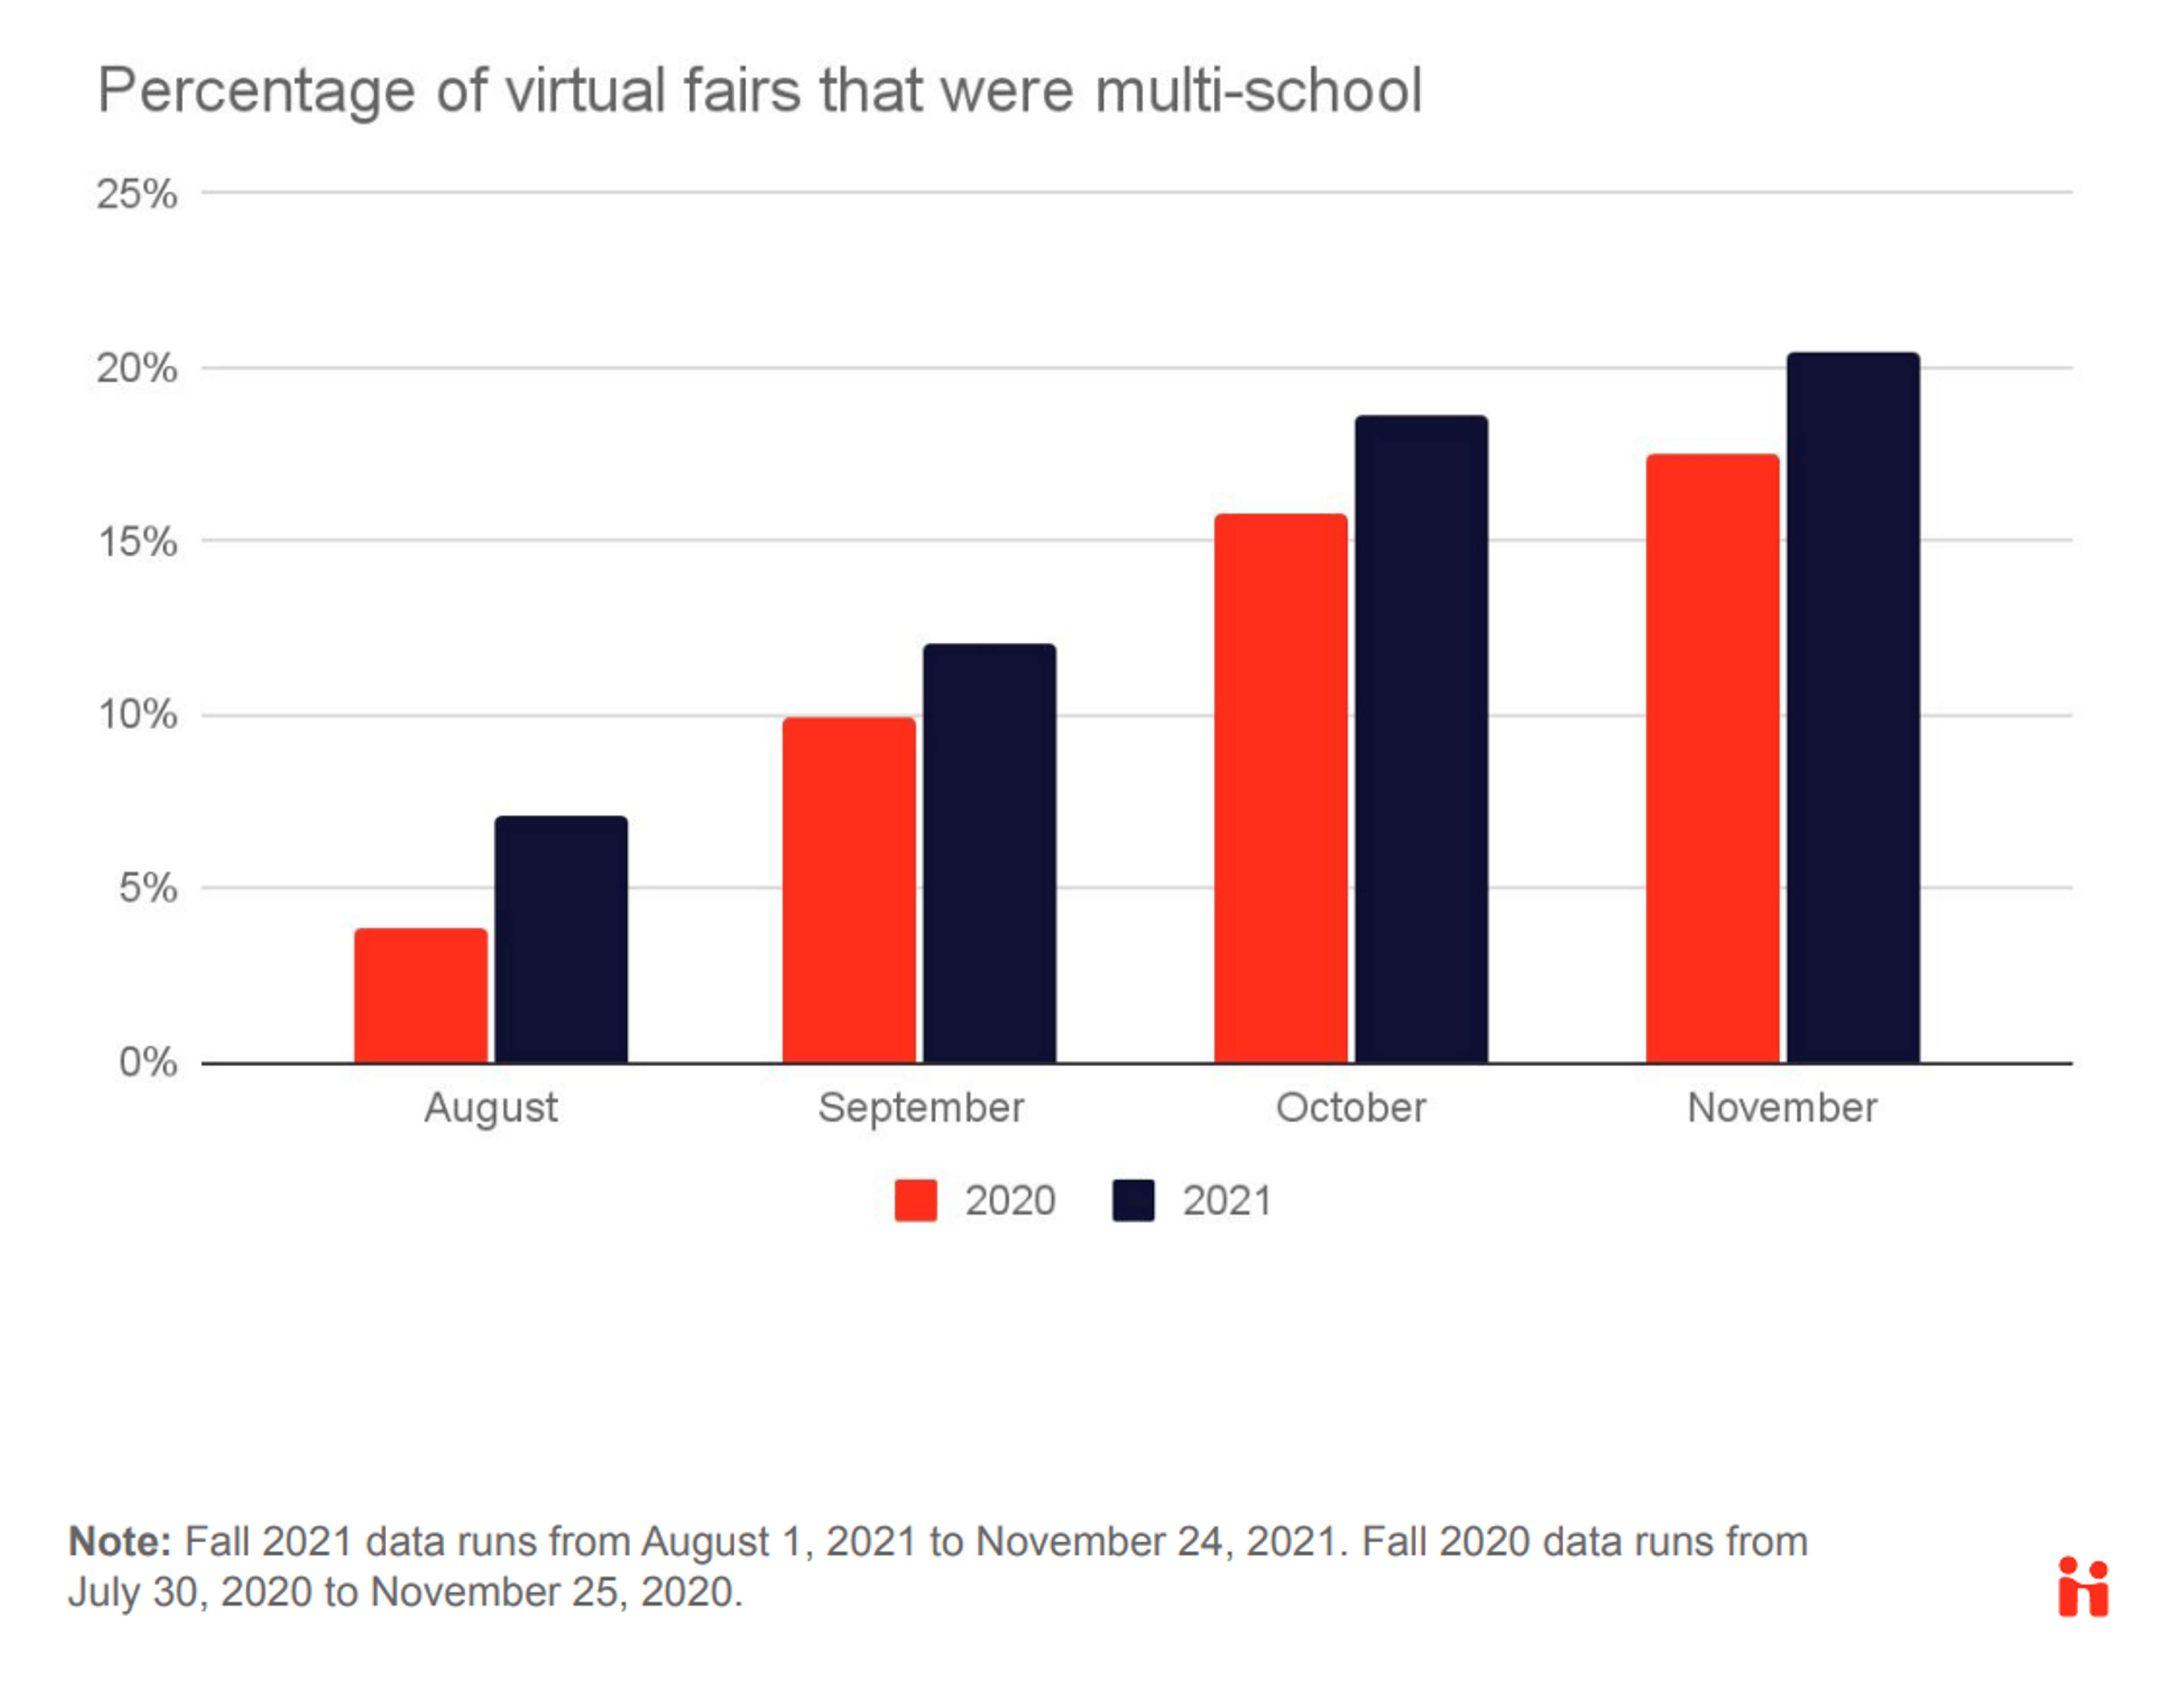 Percentage of virtual fairs that were multi-school from August 1, 2021 to November 24, 2021.